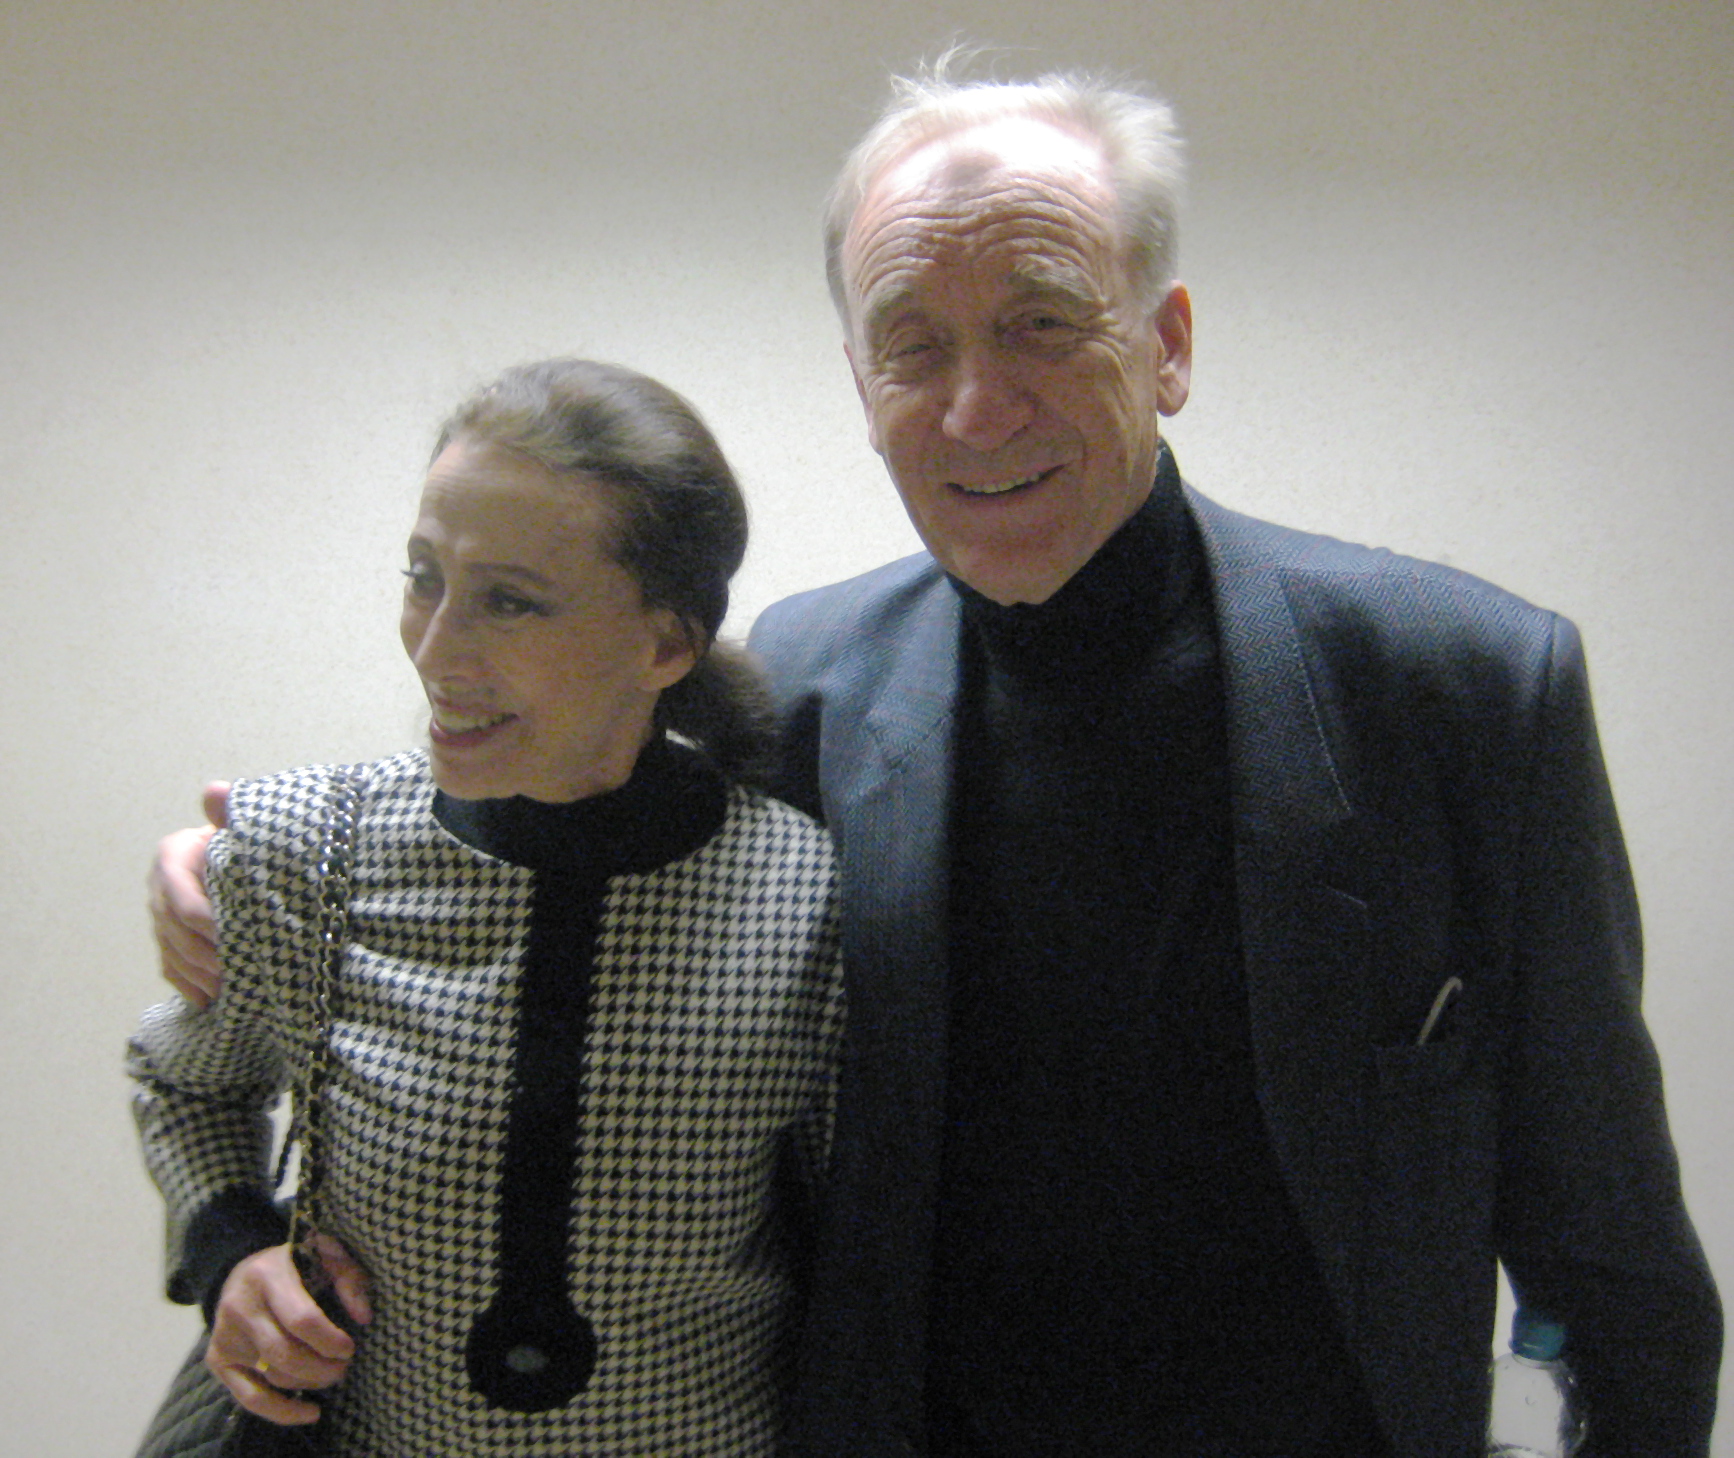 Rodion Shchedrin with his wife, Maya Plisetskaya, in 2009. Photo from Wikipedia, the free encyclopedia